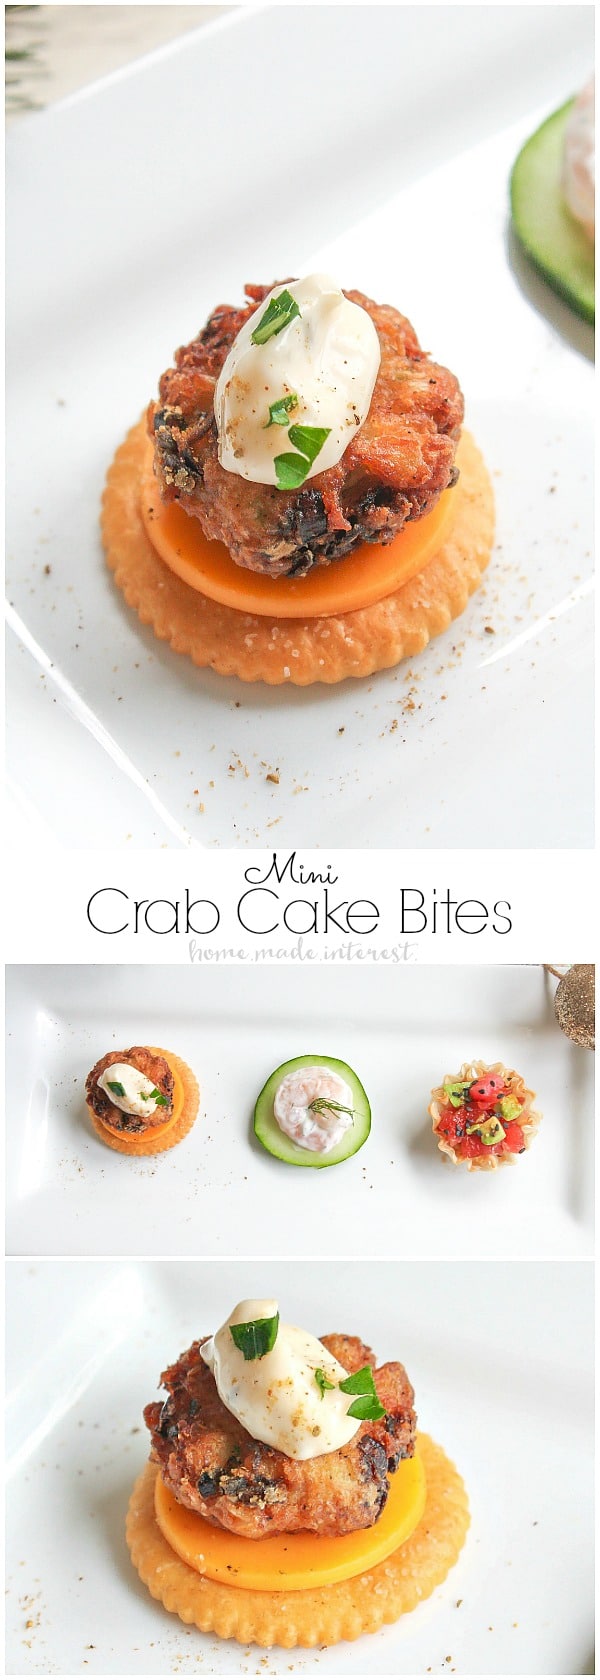 These Mini Crab Cake Bites are an easy appetizer recipe for Christmas or New Year’s Eve. This elegant bite size appetizer is a mini crab cake served over cheddar cheese on a RITZ Crackers. Enjoy these crab cakes along with several other seafood appetizers for your New Year’s Eve party. 